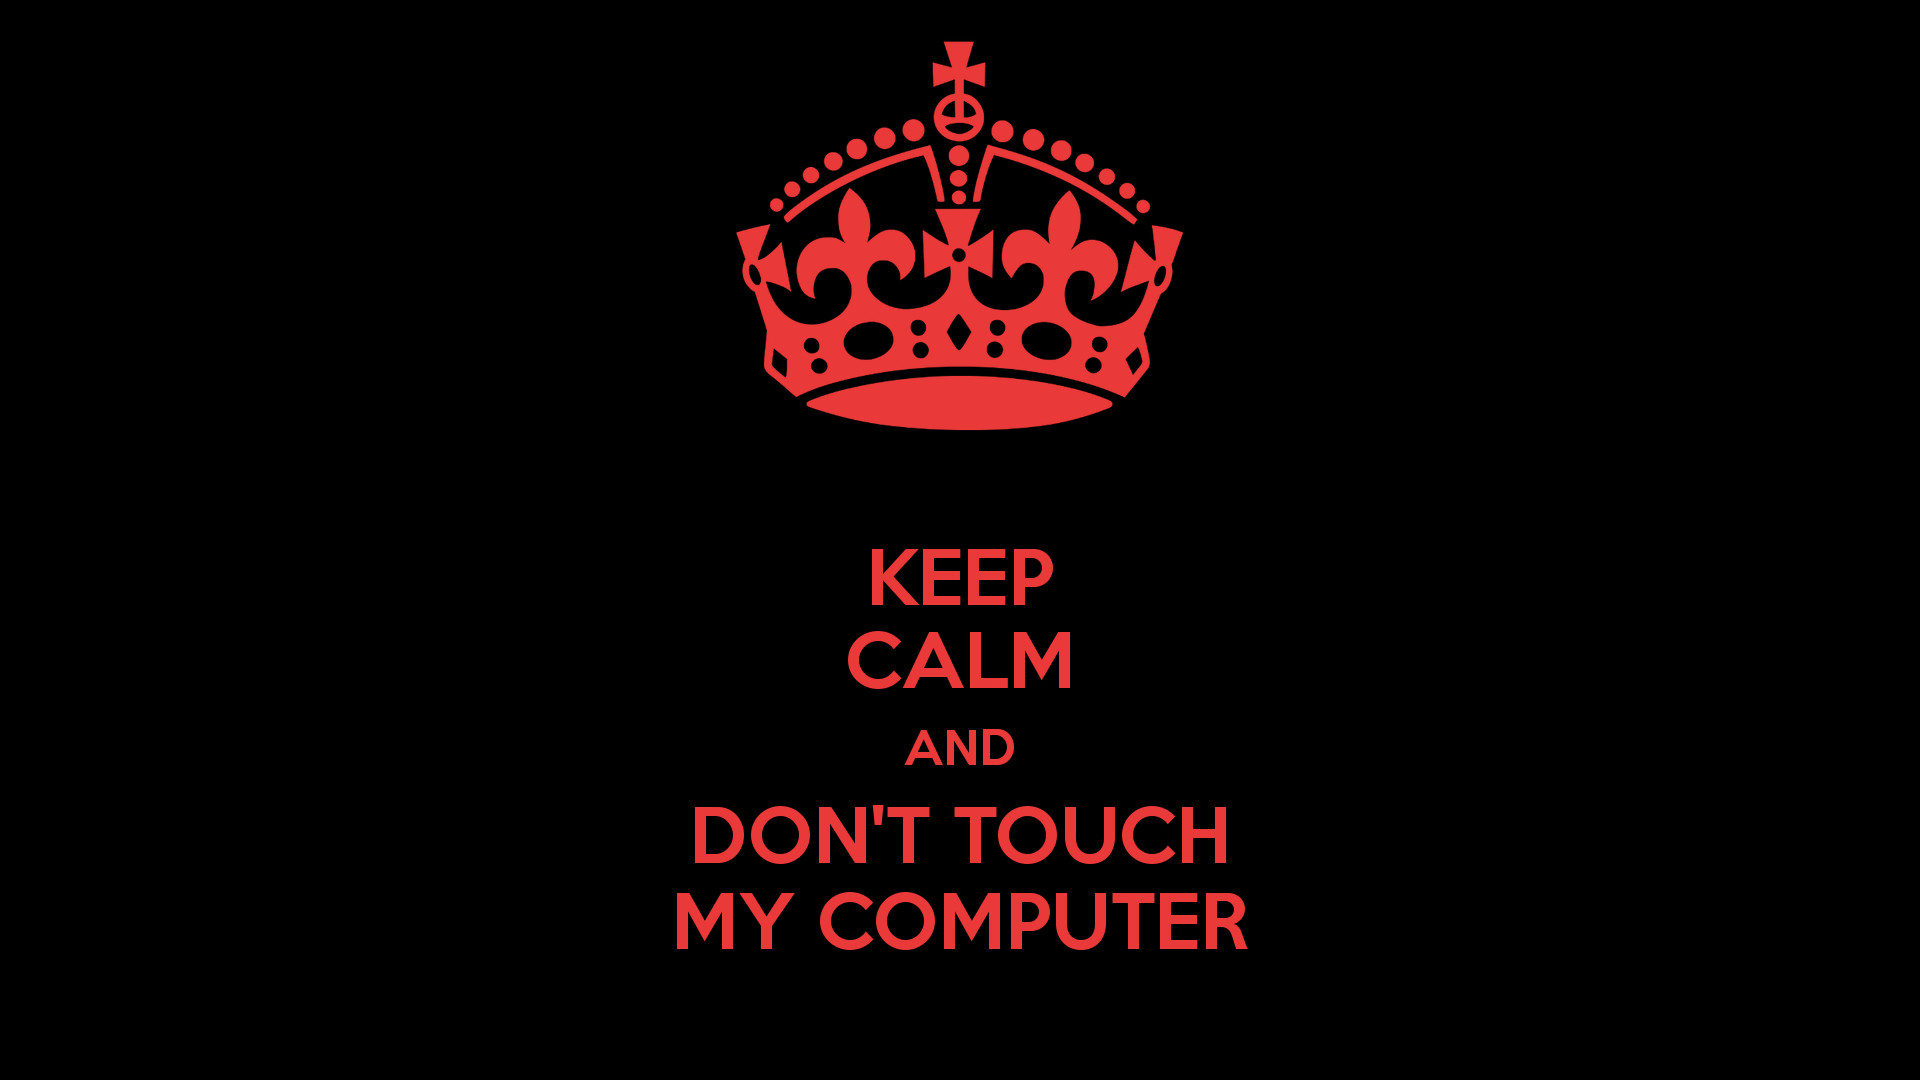 1920x1080 KEEP CALM AND DON'T TOUCH MY COMPUTER - KEEP CALM AND CARRY ON Image